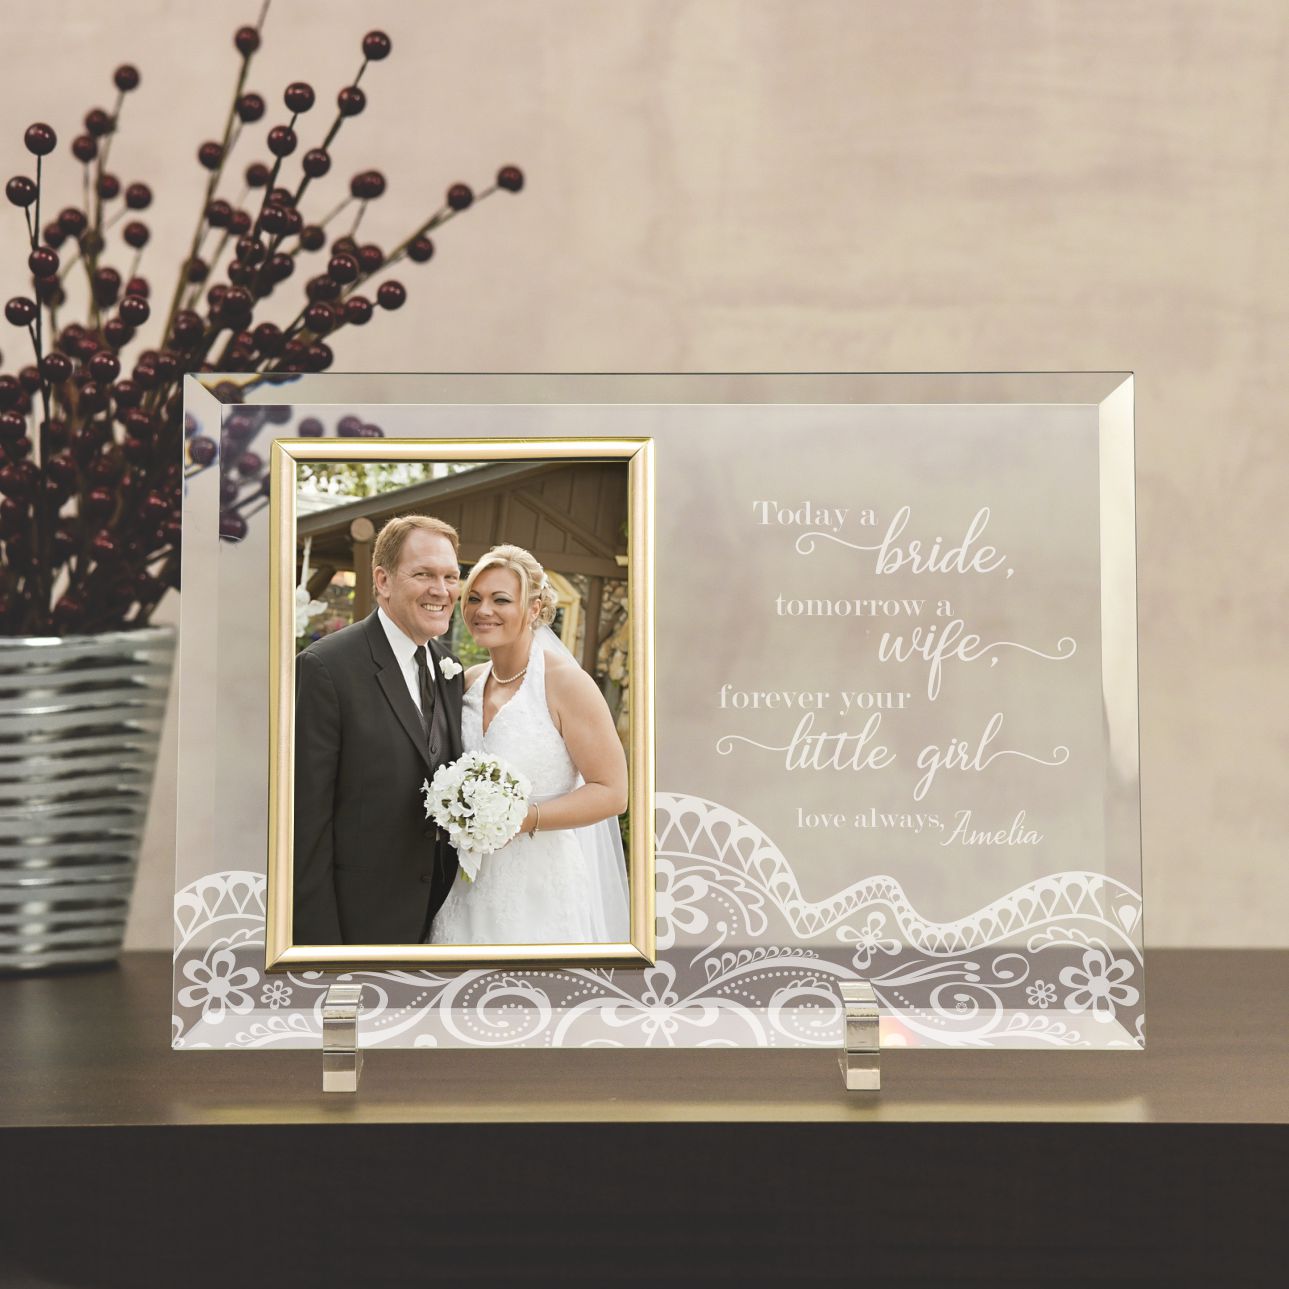 Personalized wedding frames for parents of the bride